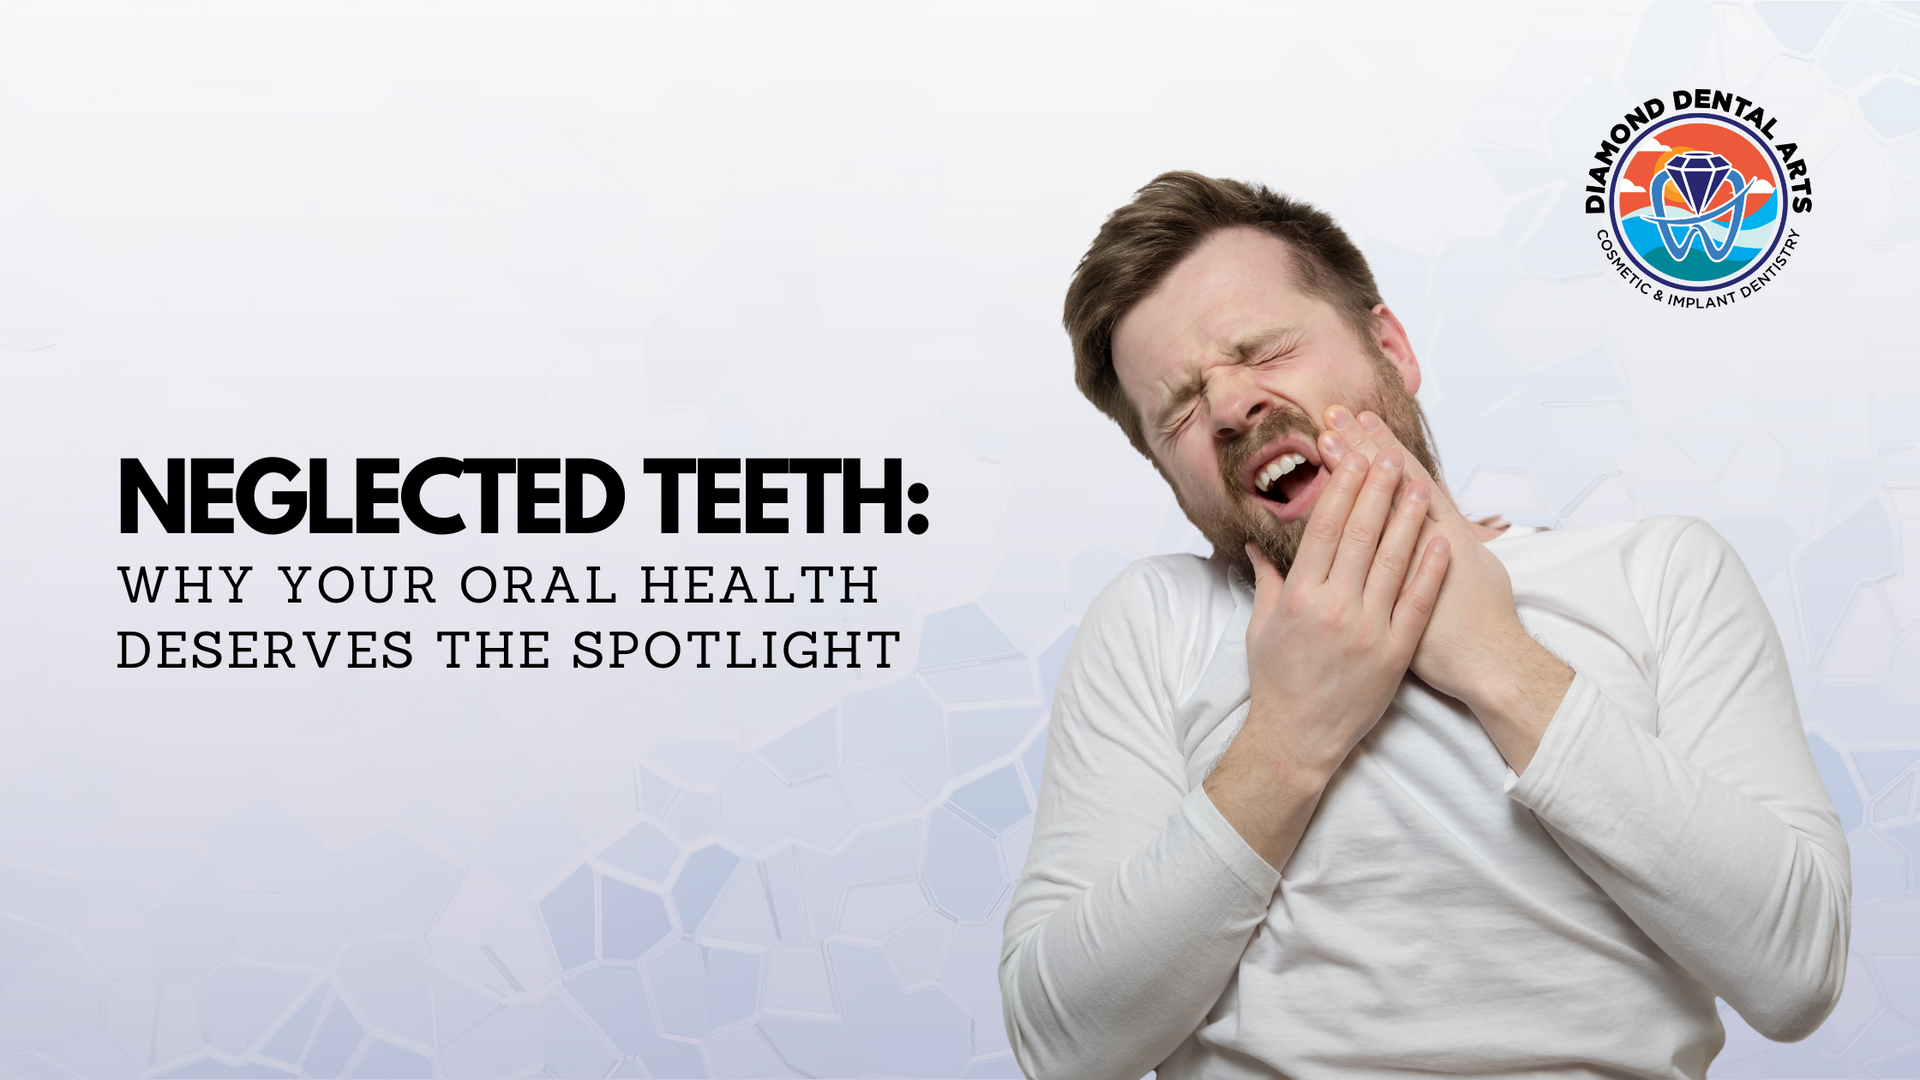 A man is holding his mouth in pain because of neglected teeth.